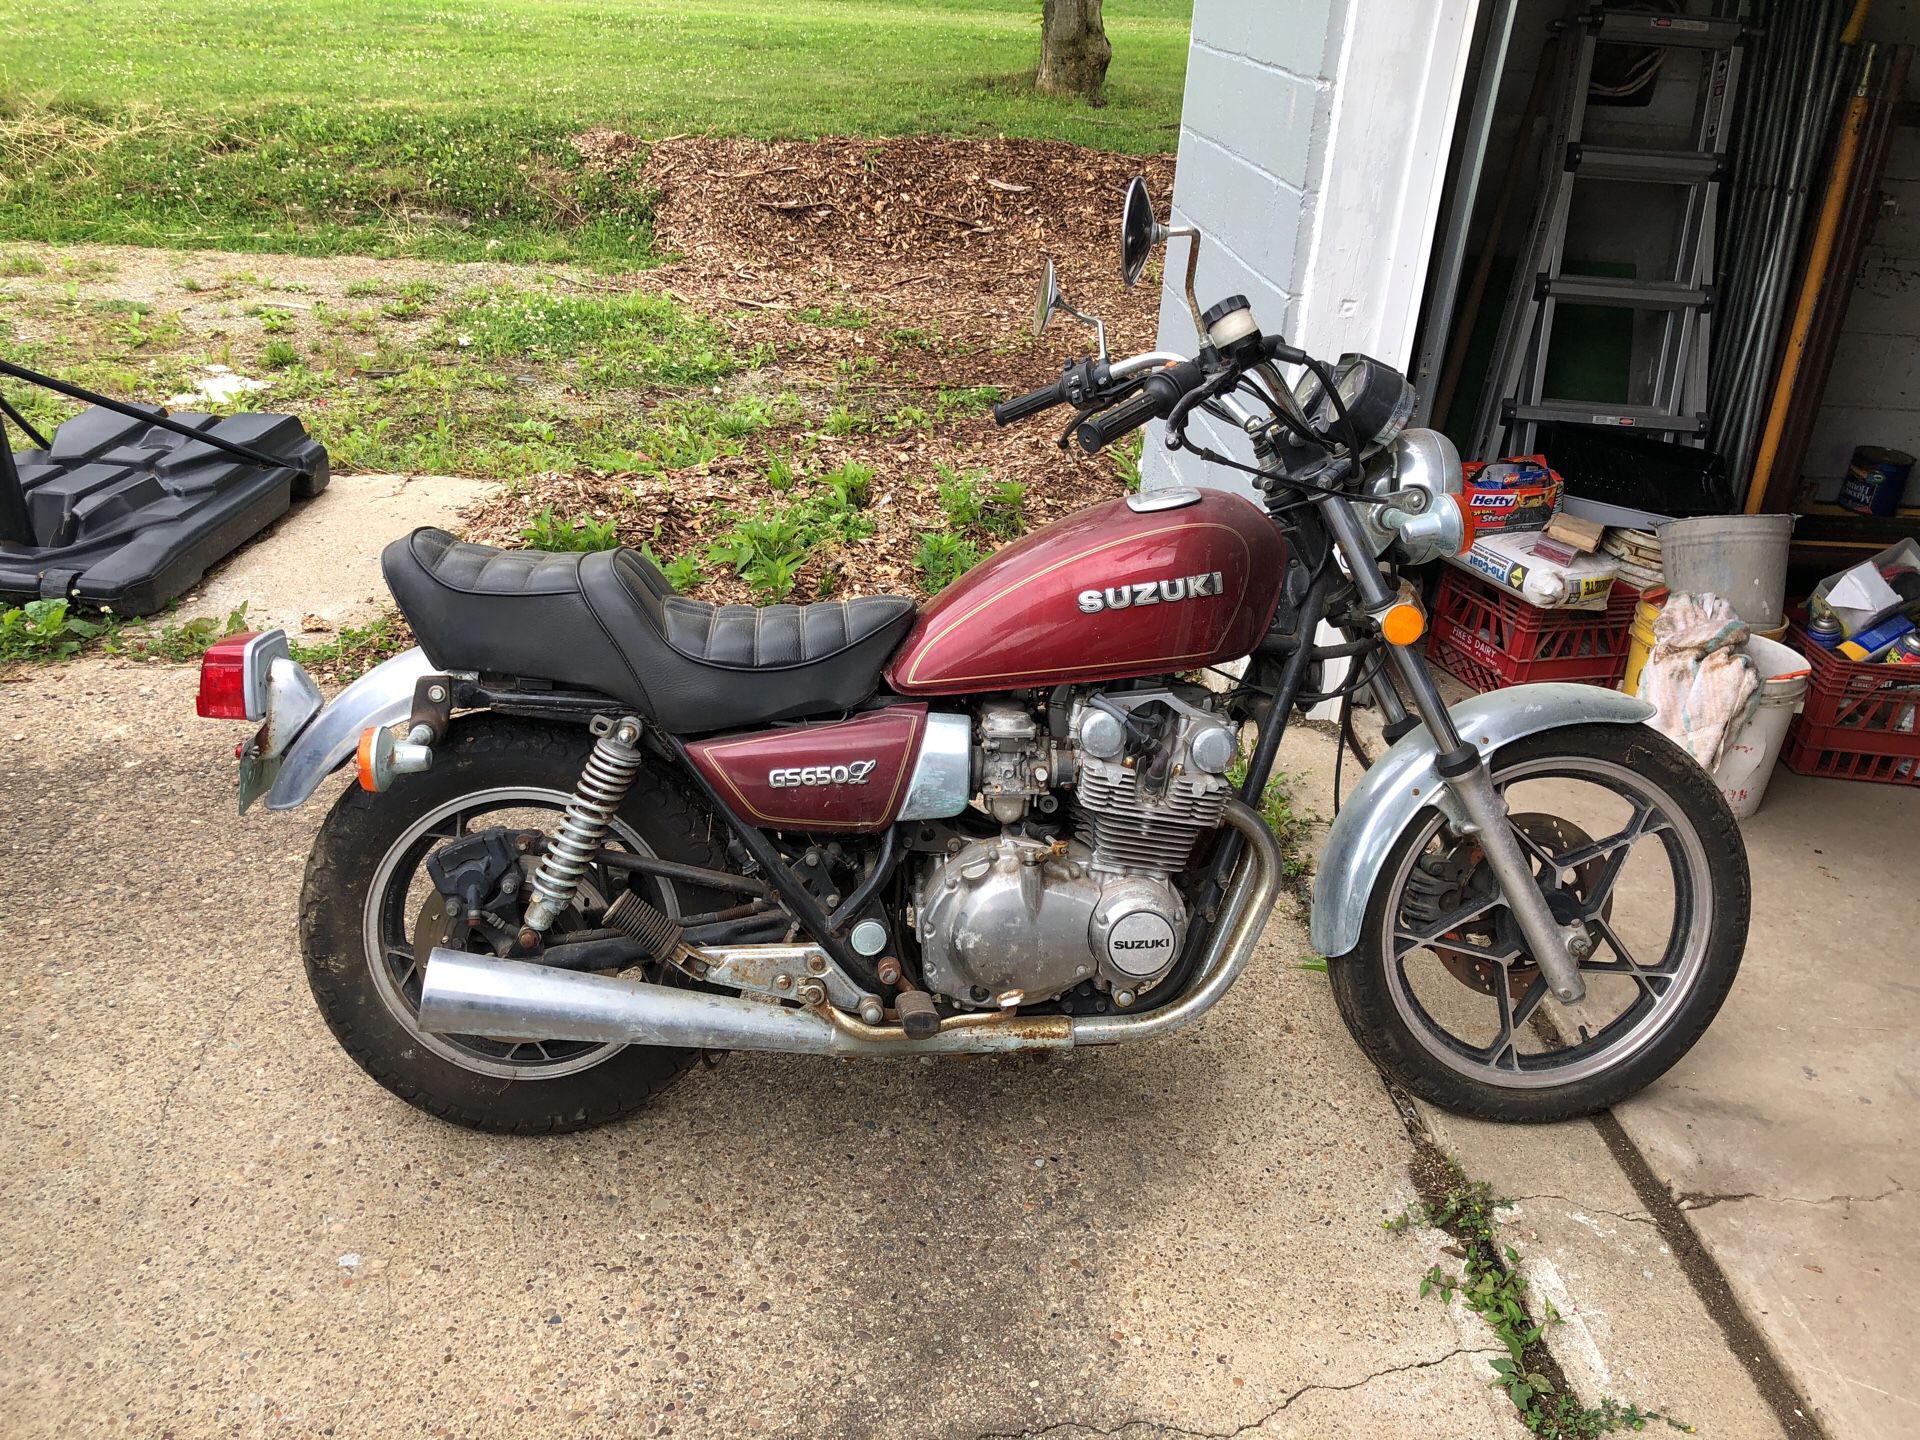 Suzuki GS650L Motorcycle For Parts or Repair